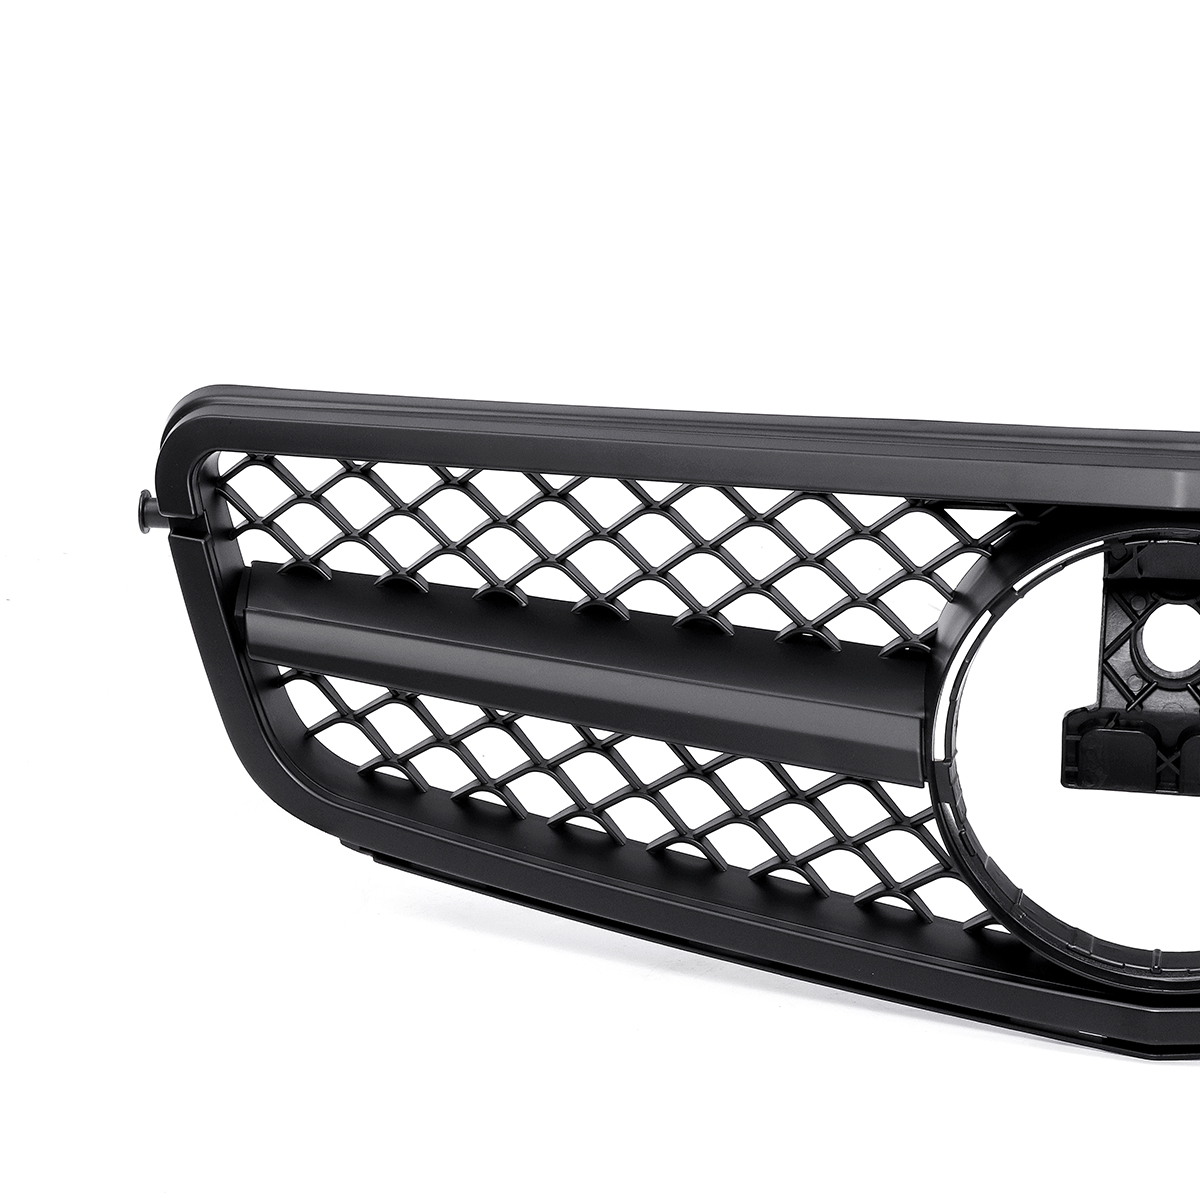 C63 AMG Style Front Upper Grille Grill for Mercedes Benz C Class W204 C180 C200 C300 C350 2008-2014